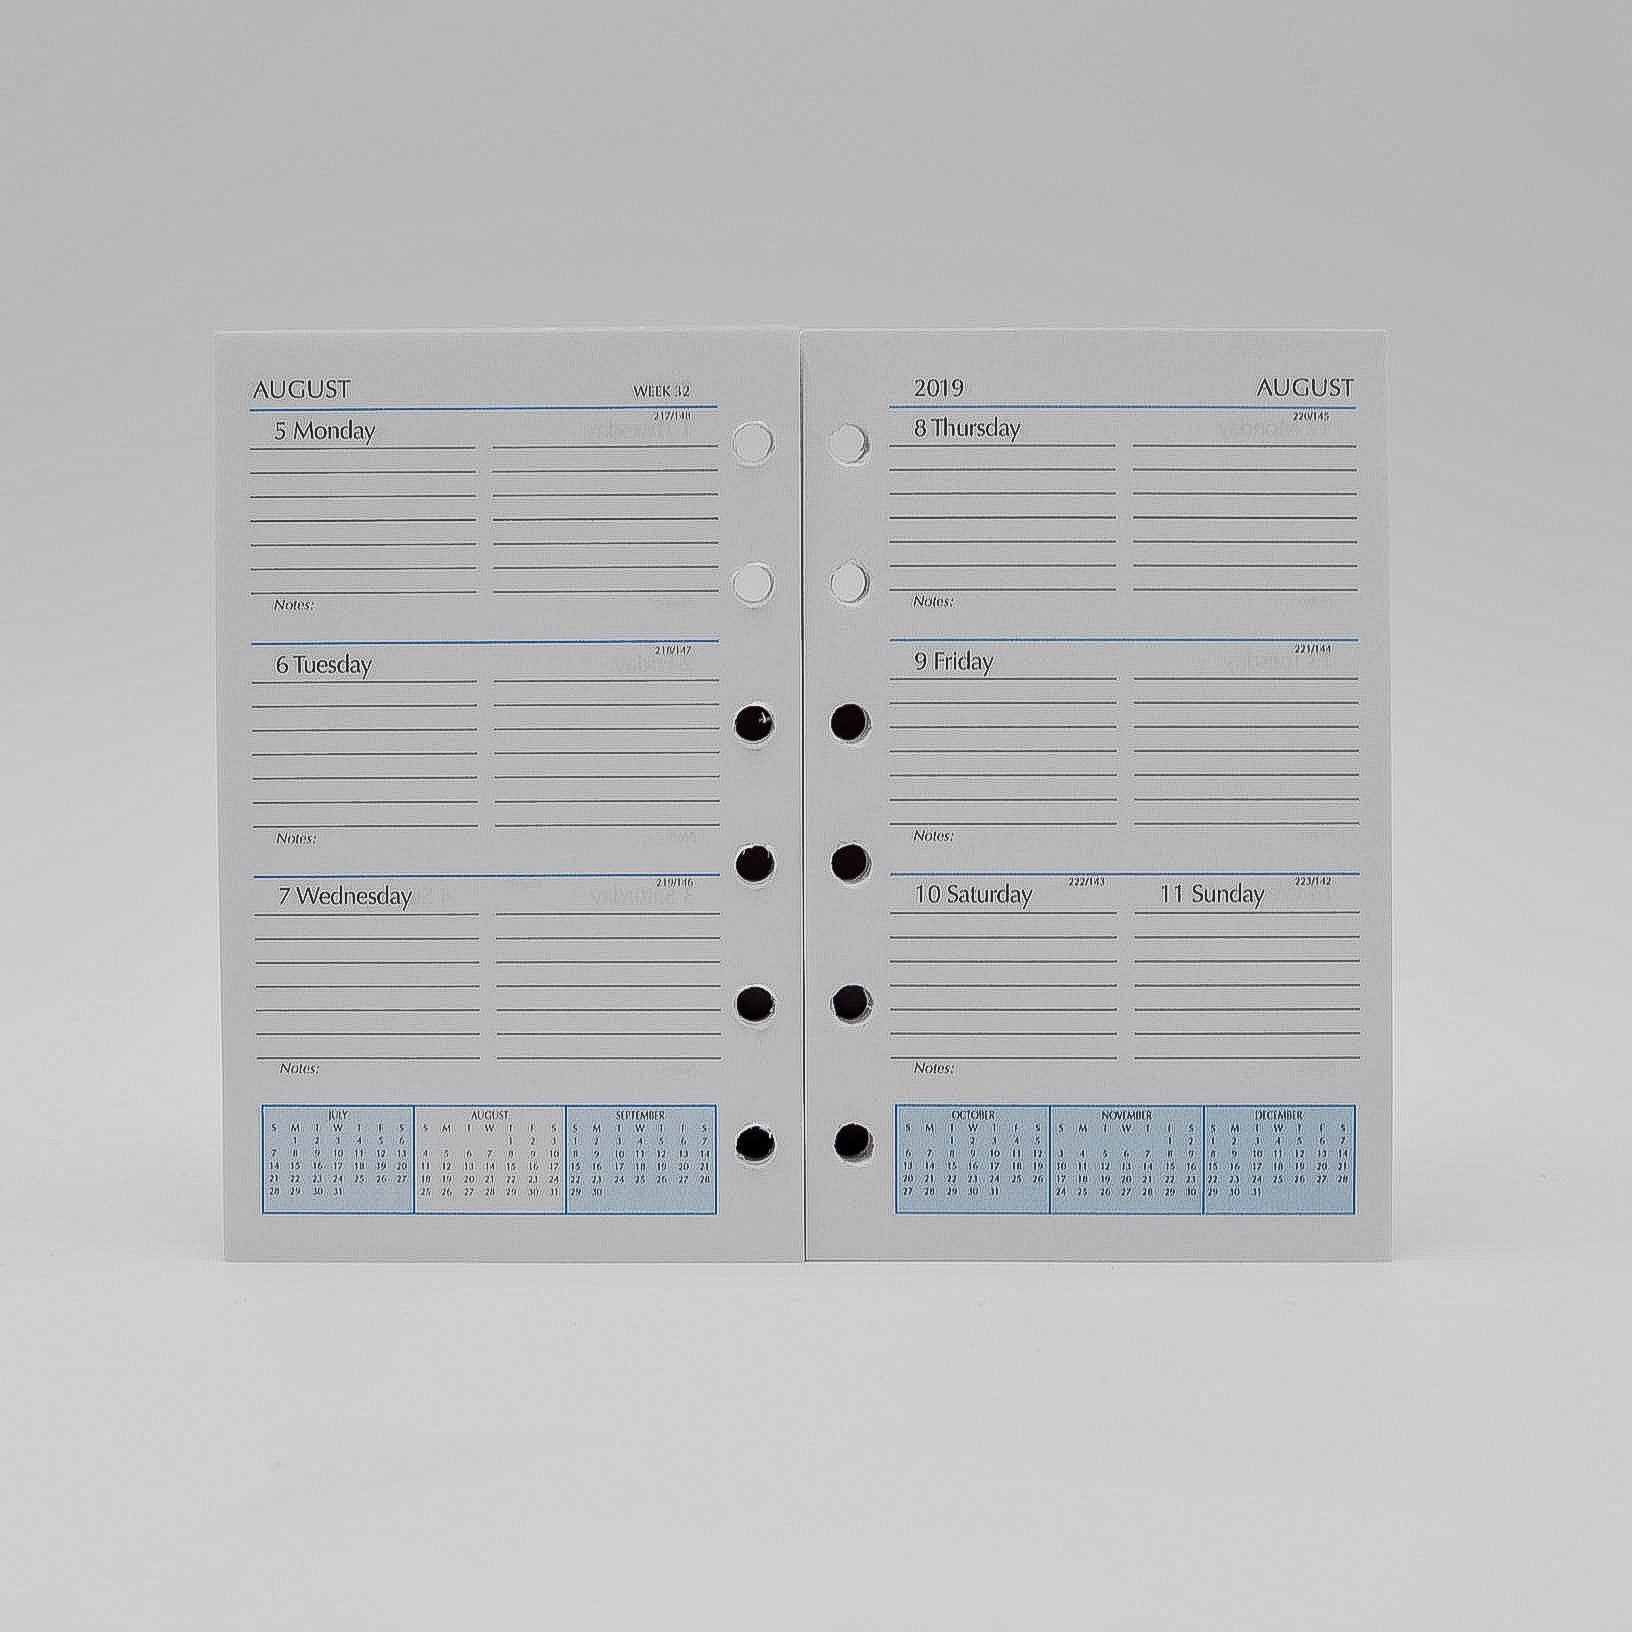 Monthly/Weekly Planner Refill 6-hole 3-1/8 x 5 : MP35P6 - REFILL